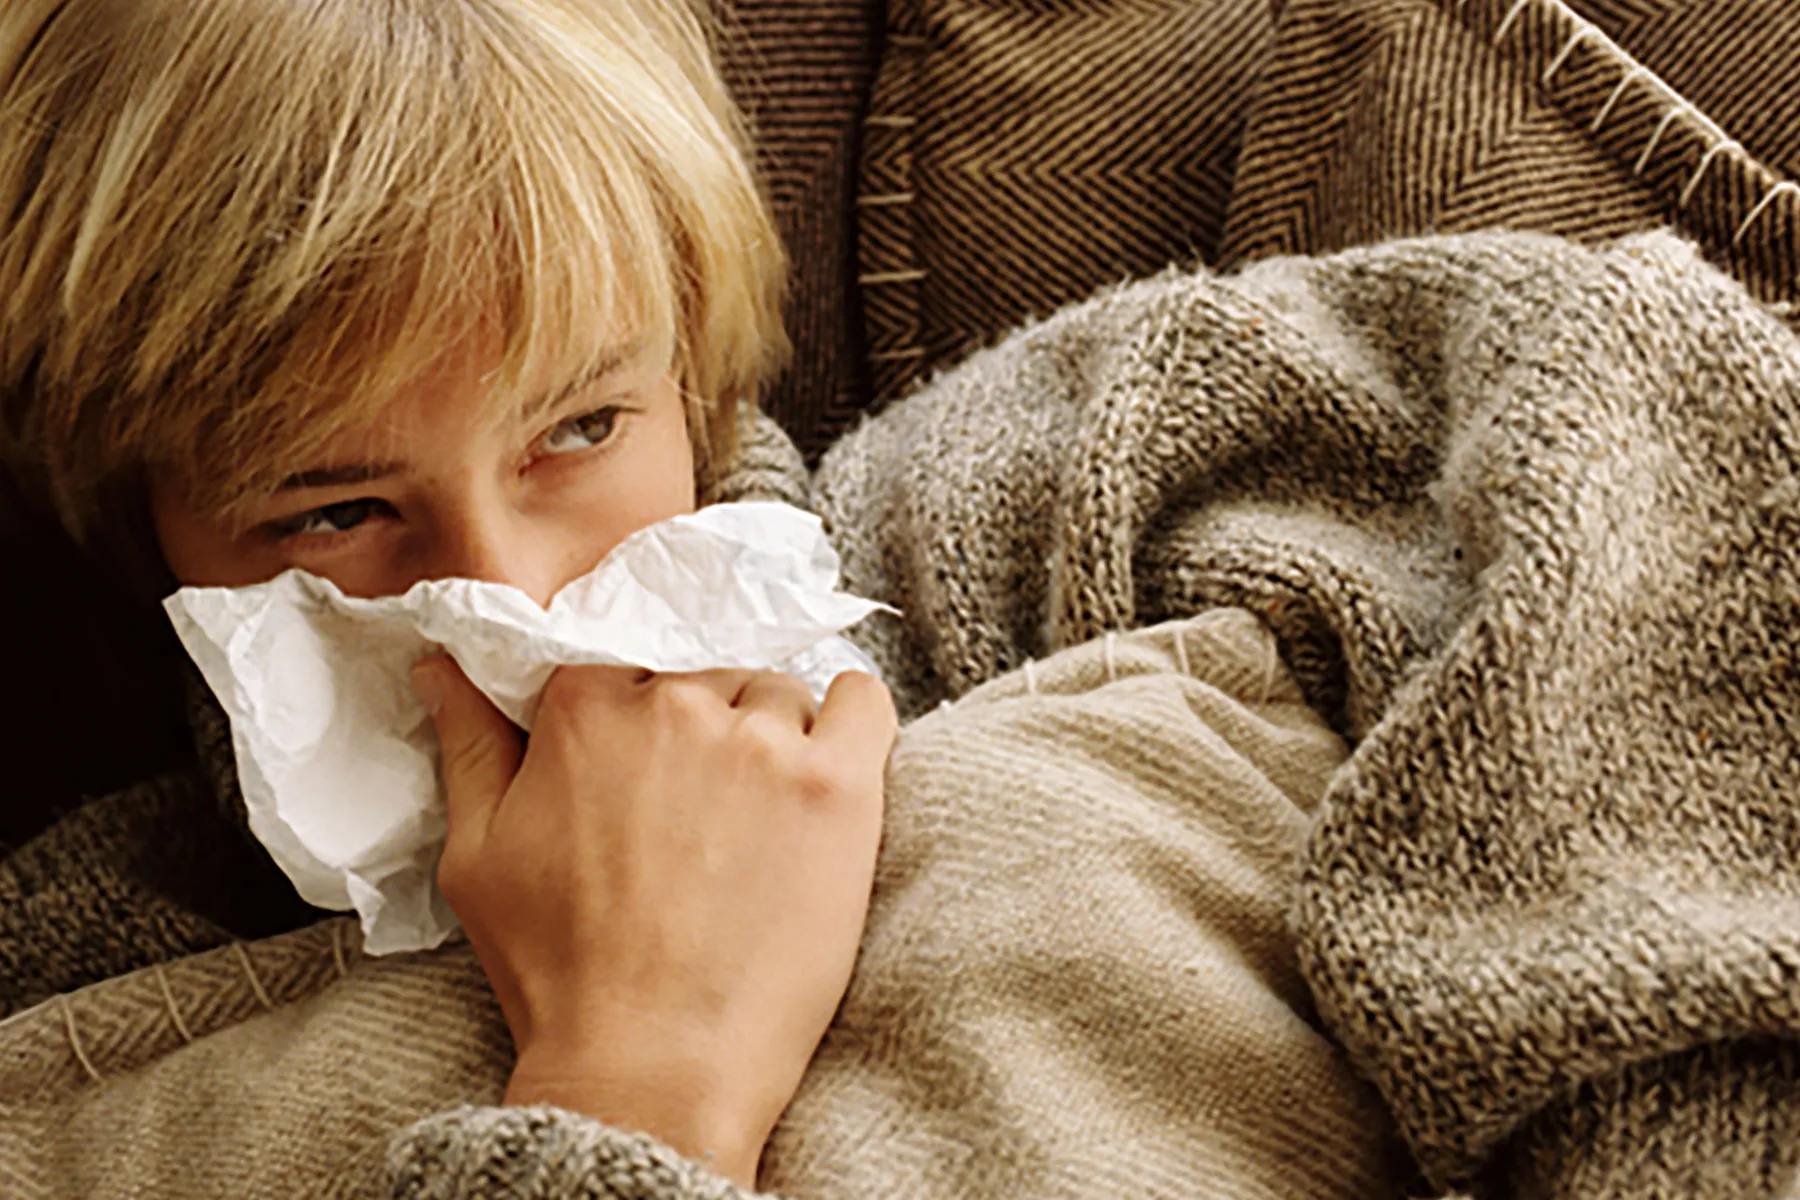 Is It RSV, COVID, the Flu or the Common Cold?